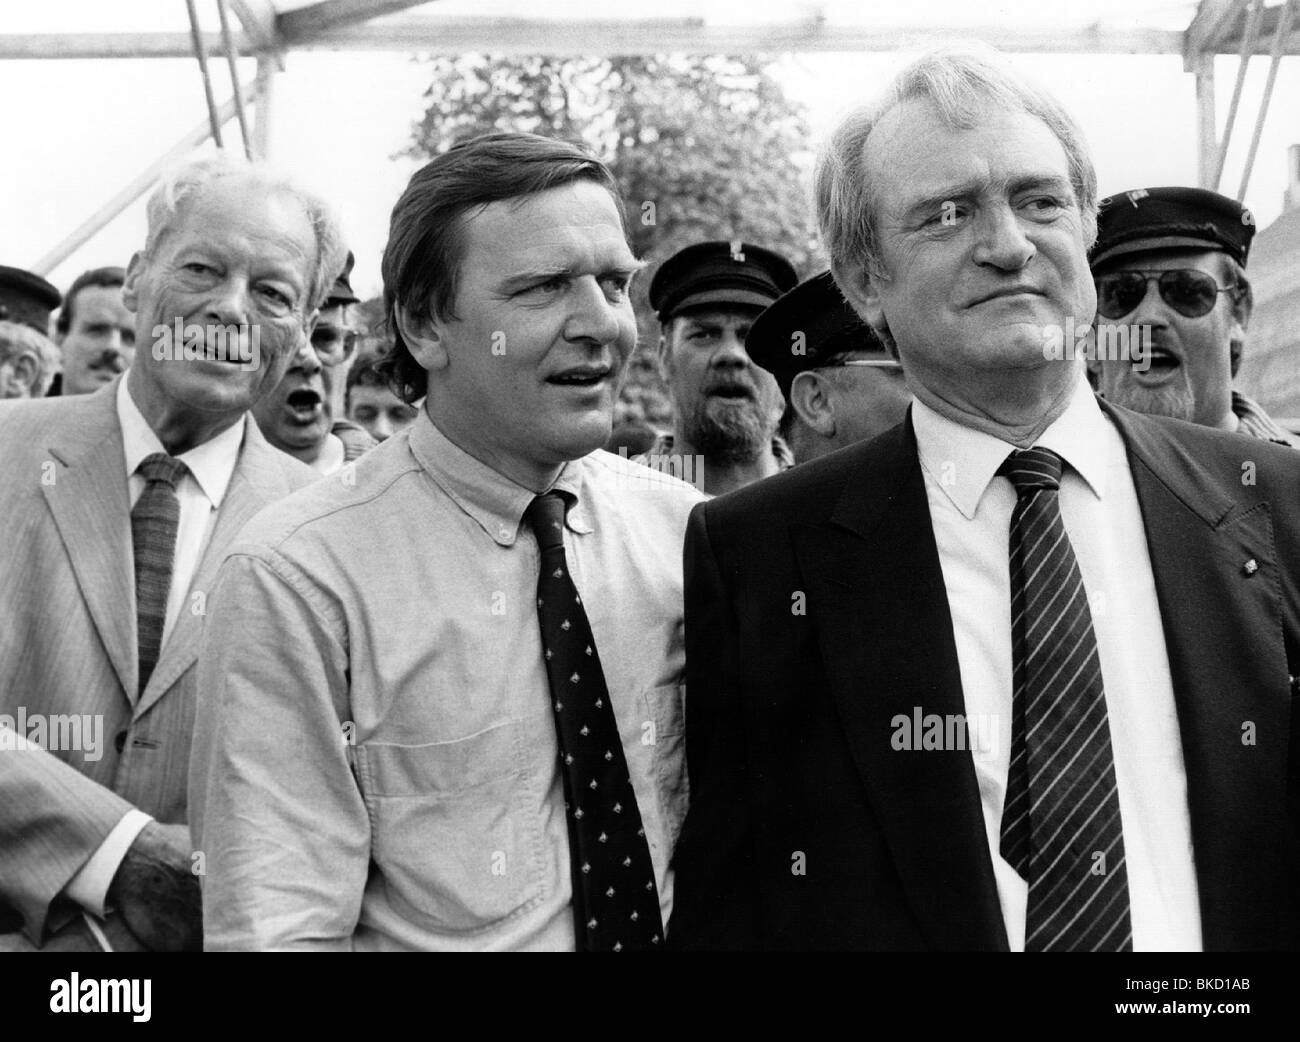 Schroeder, Gerhard, * 7.4.1944, German politician (SPD), half length, with Willy Brandt and Johannes Rau, as top candidate for Lower Saxony, Hanover, 3.5.1986, Stock Photo